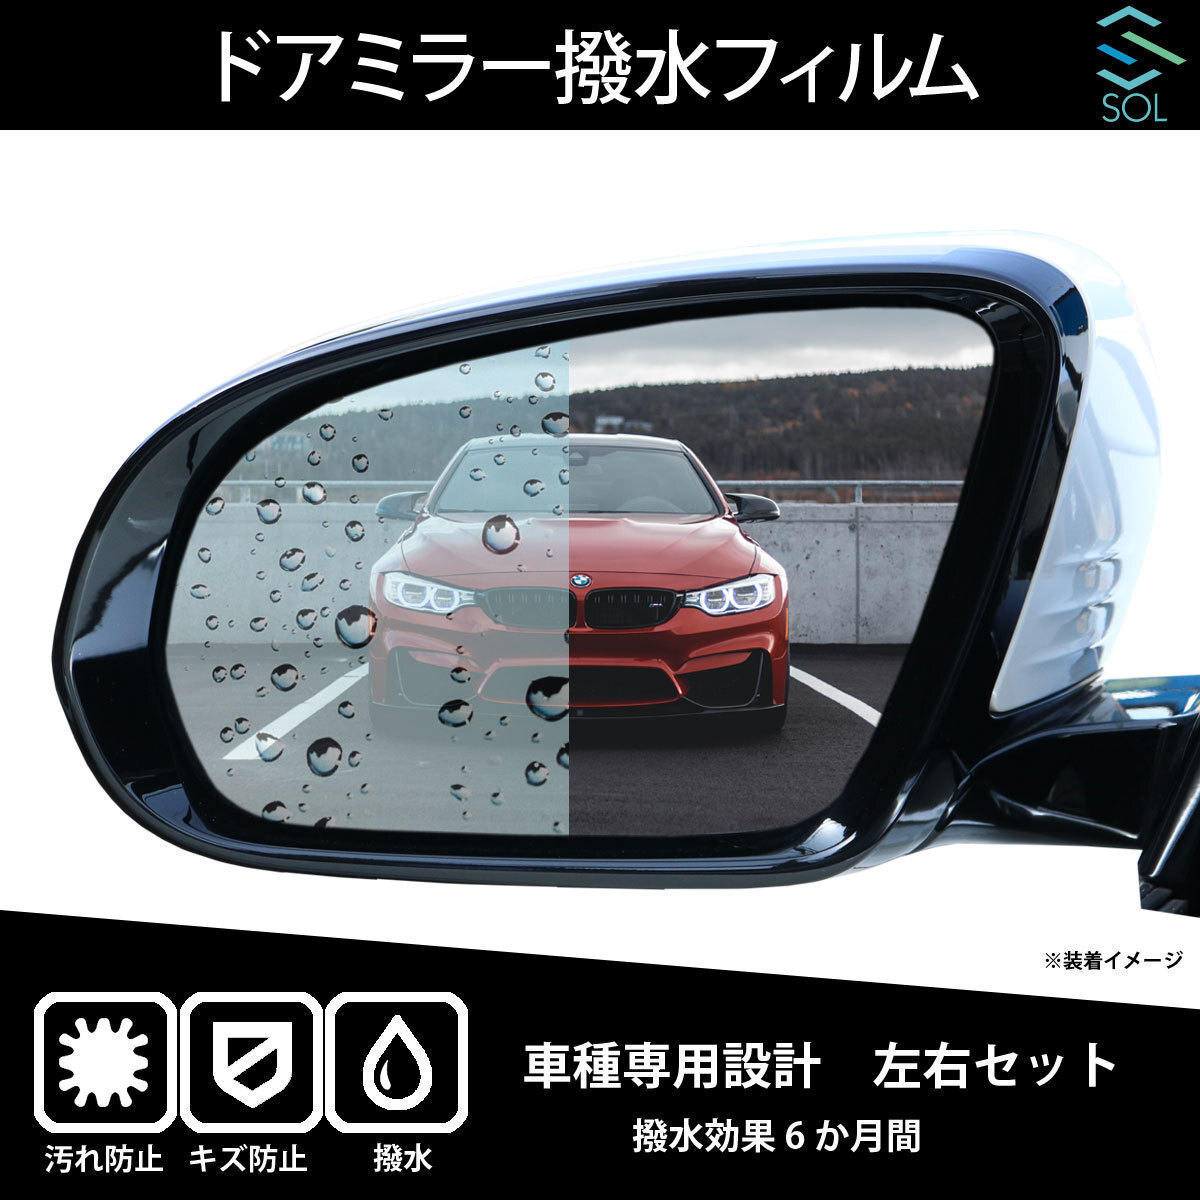  postage 185 jpy car make exclusive use Benz W639 06~11 exclusive use water-repellent door mirror film left right set water-repellent effect 6 months shipping deadline 18 hour 